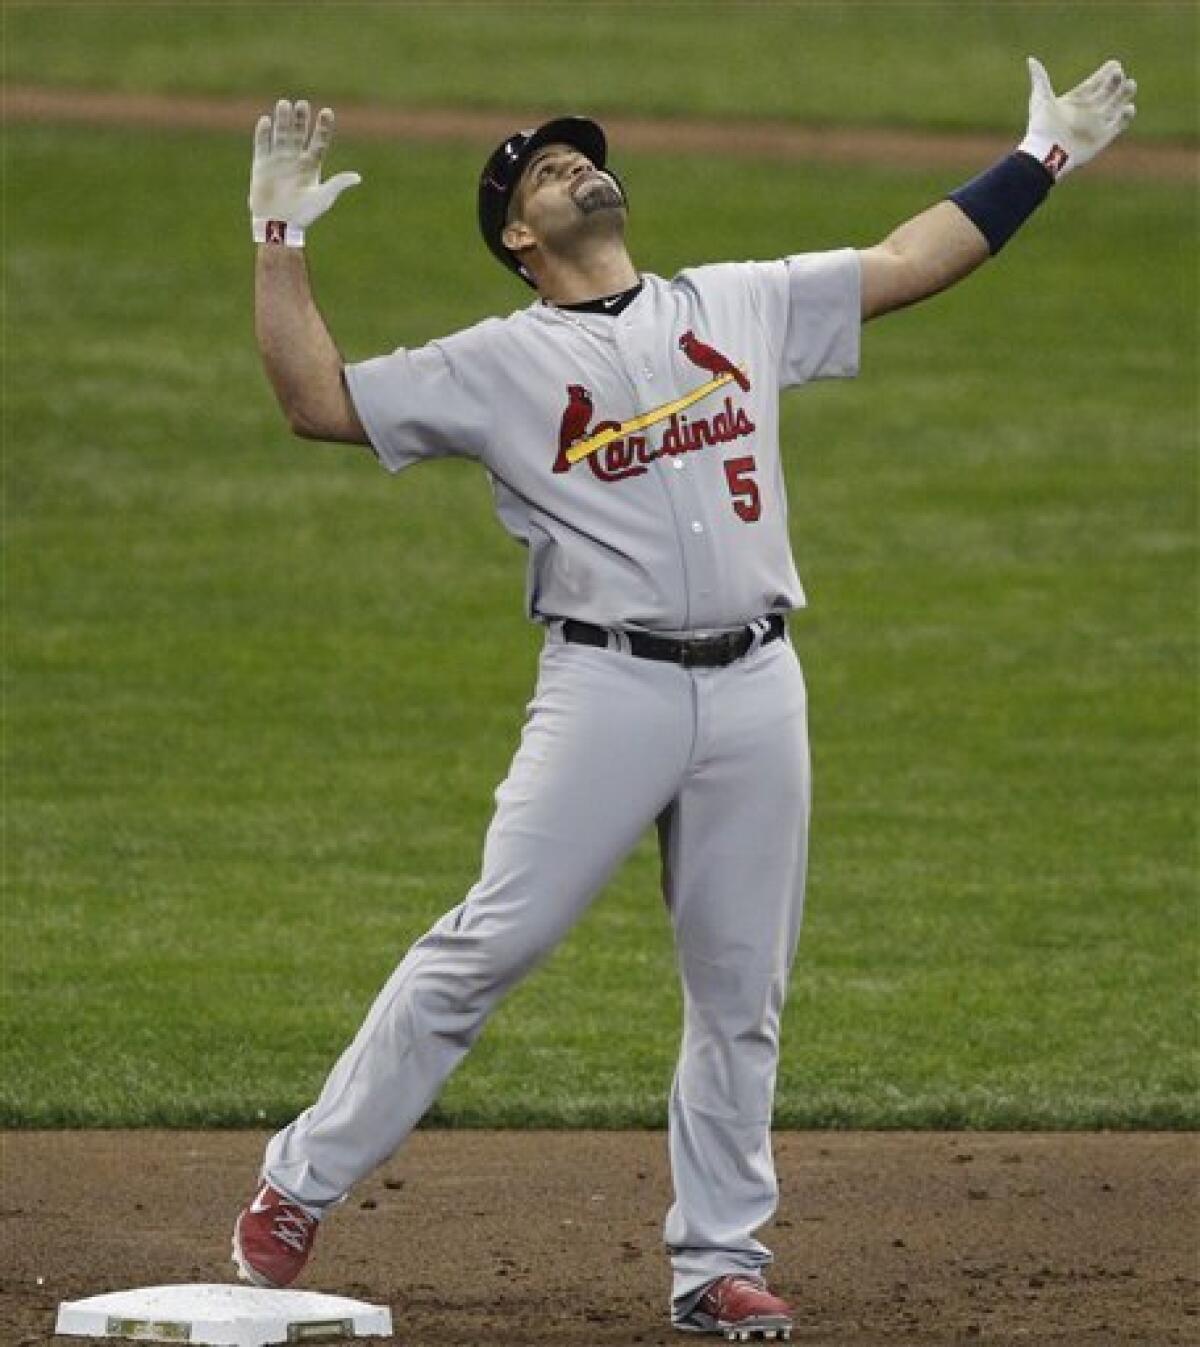 Baseballer - Pujols has announced that this will be his final season and he  will retire as a Cardinal. via: MLB